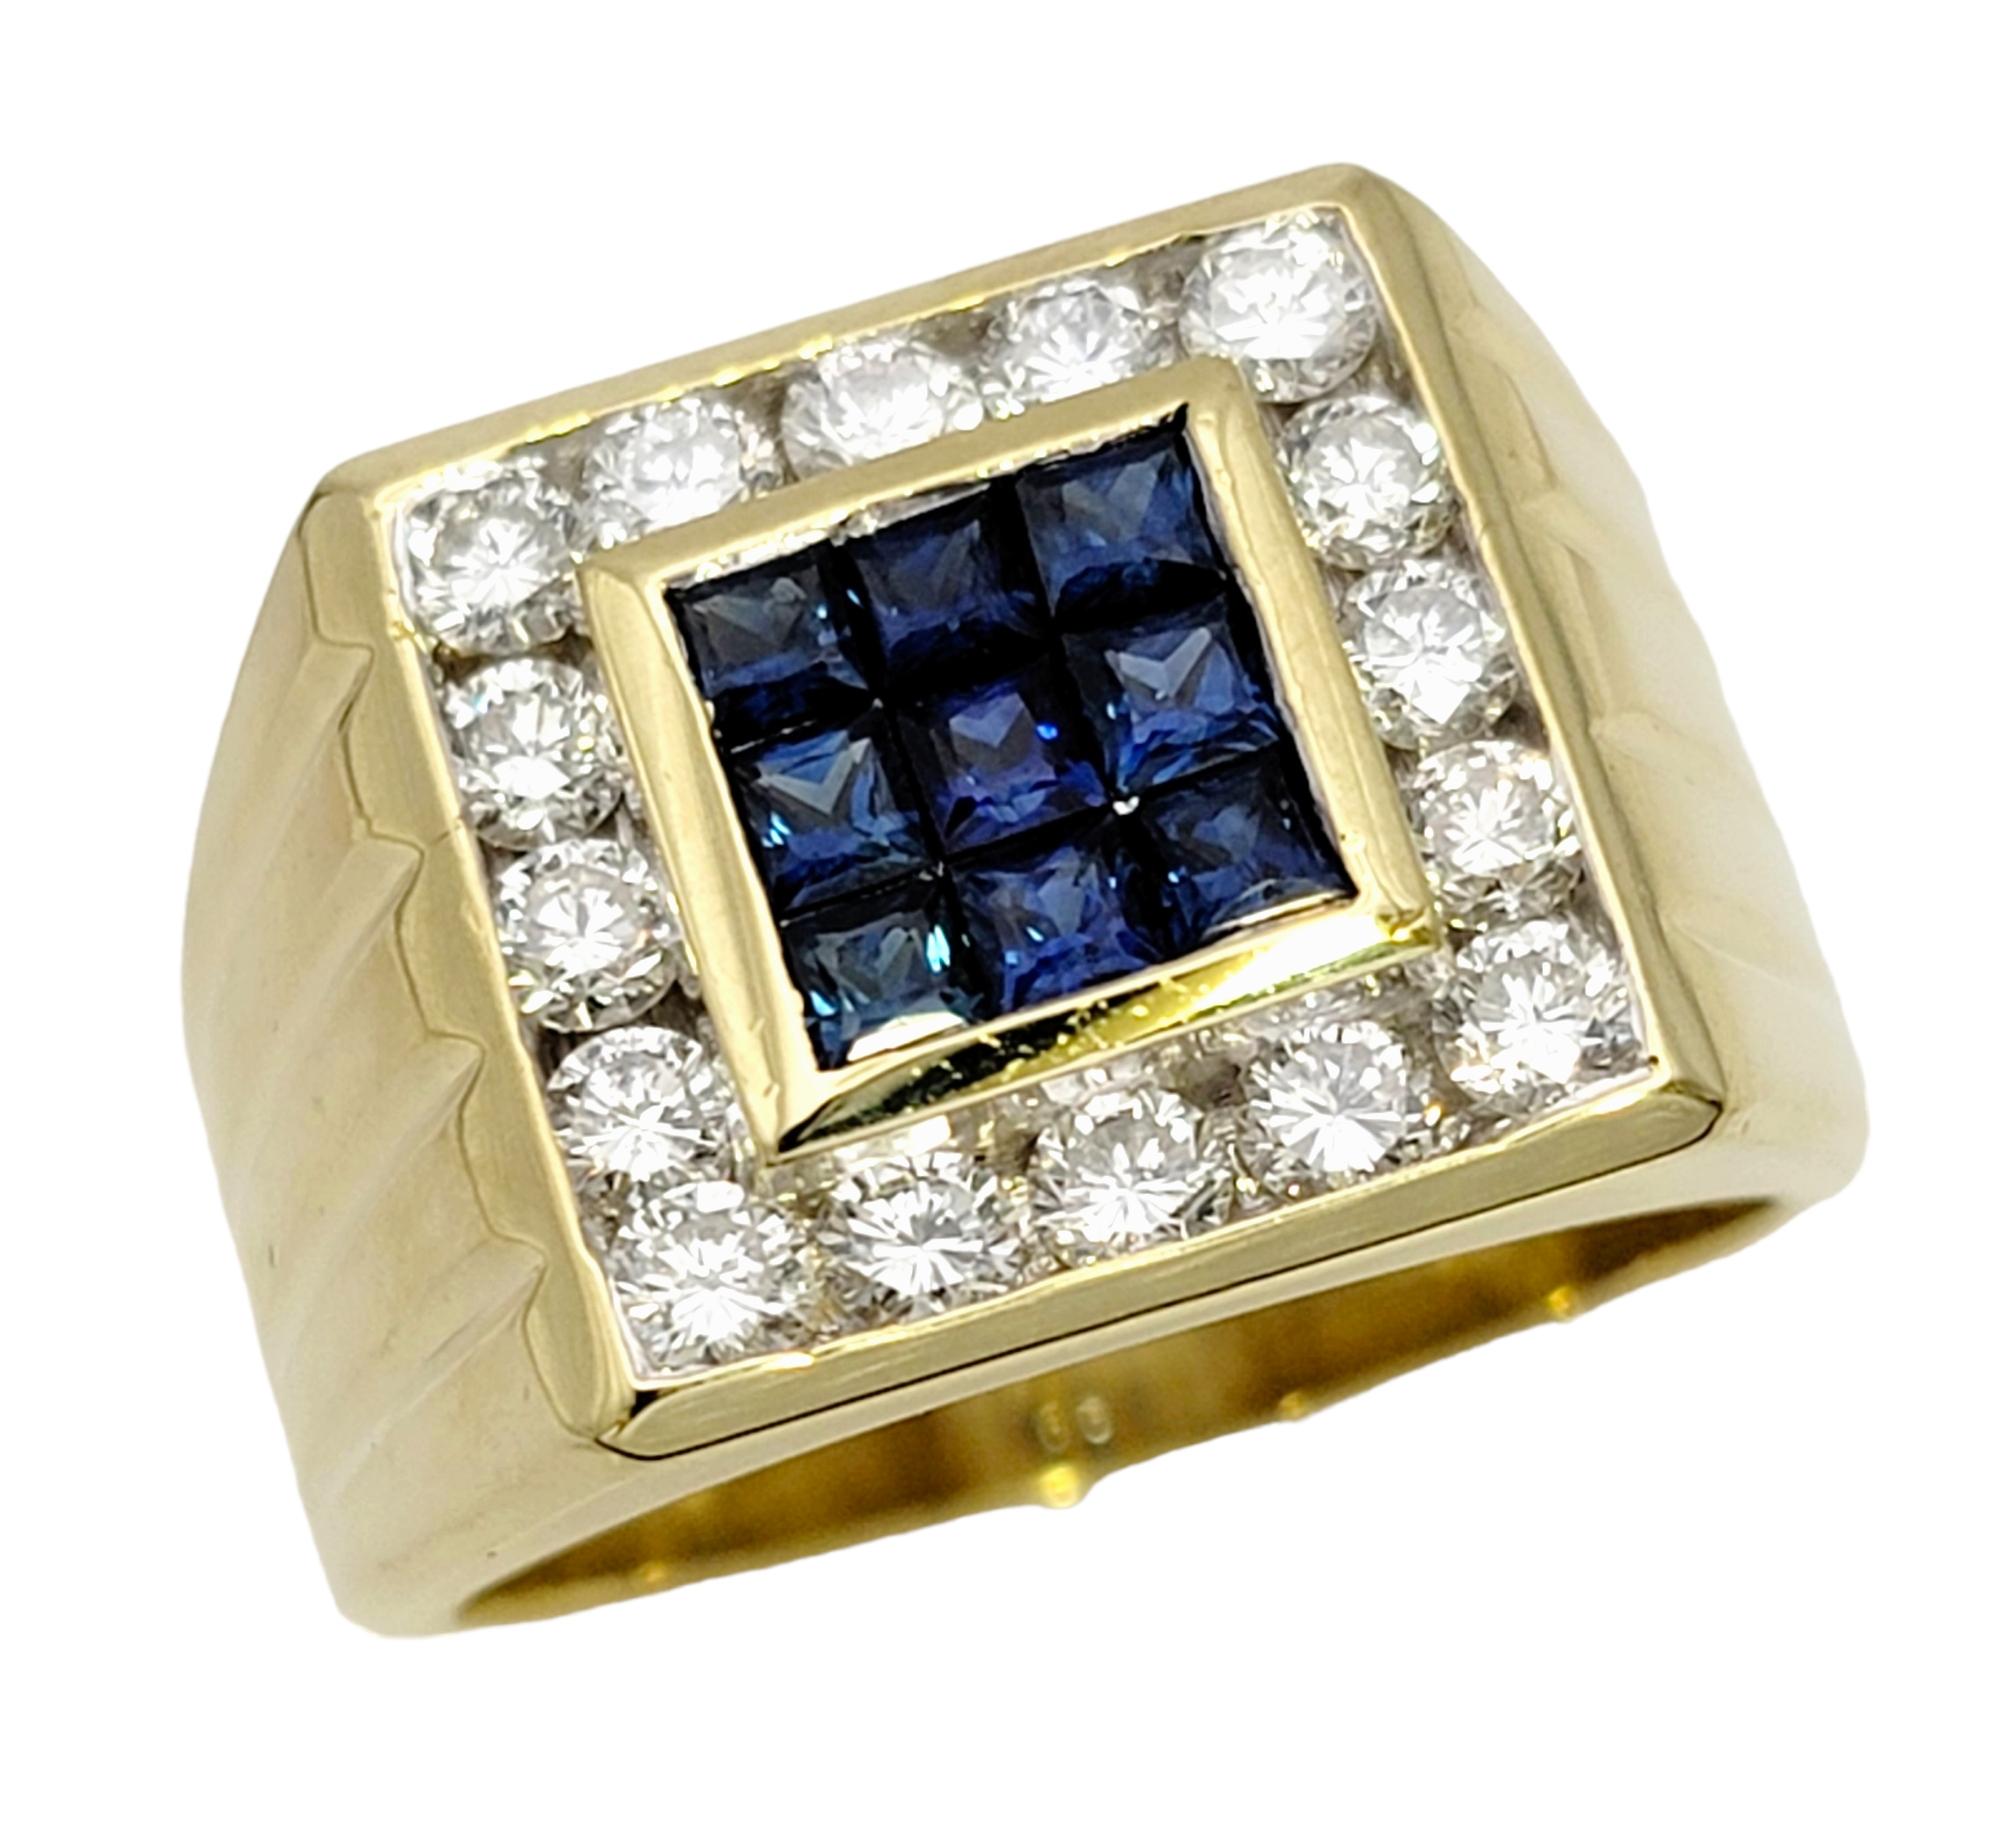 Ring size: 10.75

Bold and brilliant mens diamond and sapphire statement ring. This incredibly handsome piece features an array of natural gemstones in a sleek, geometric design. Modern and striking, this piece will fill the finger with luxury.